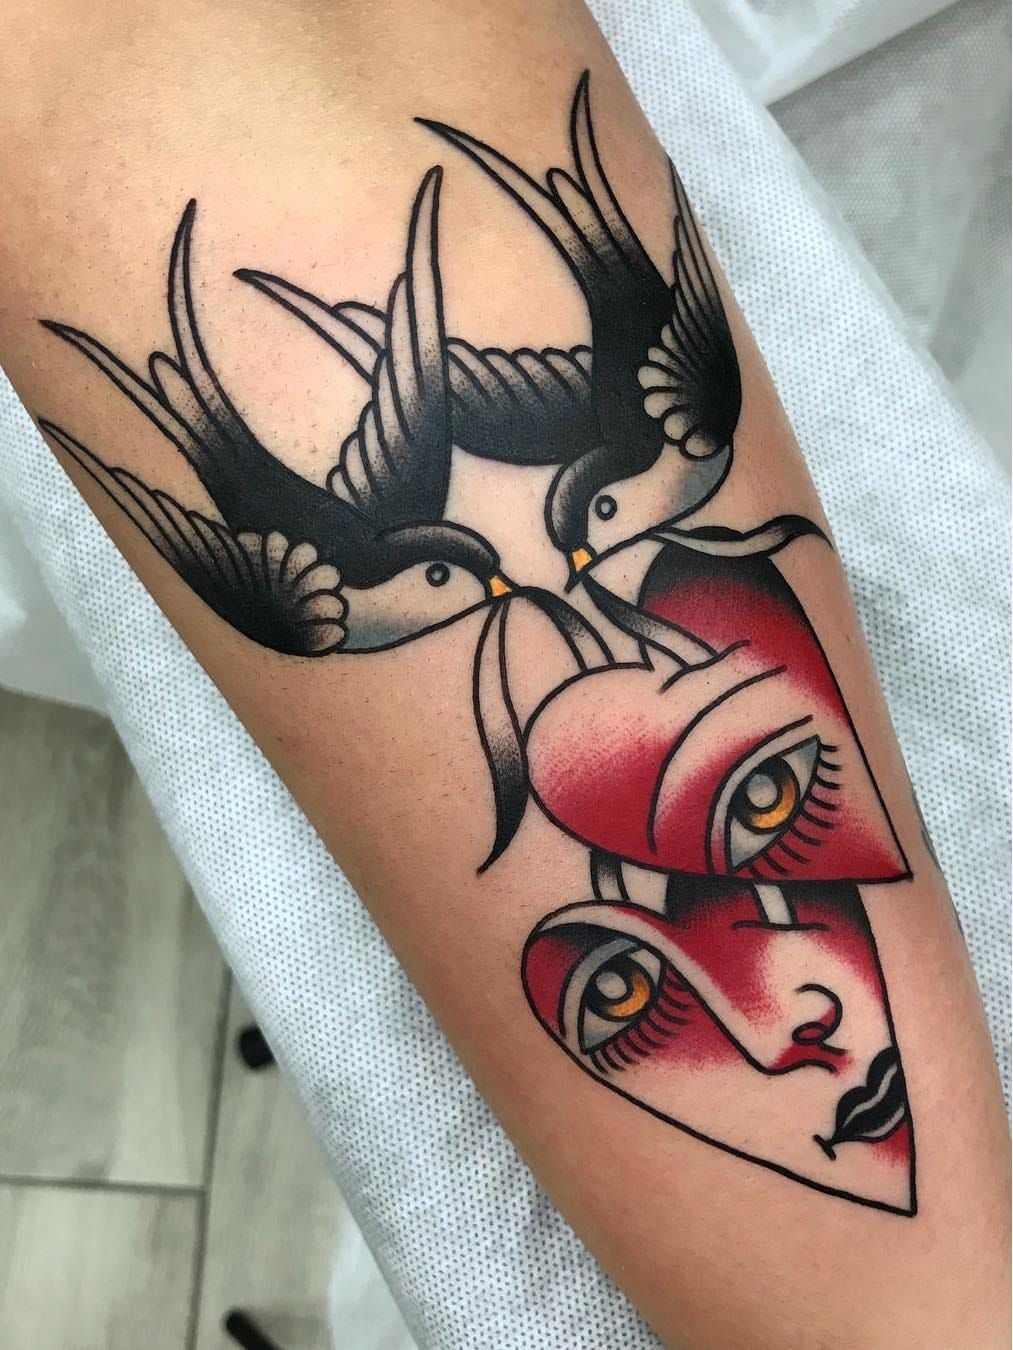 Why not check these latest unique traditional swallow tattoo we picked